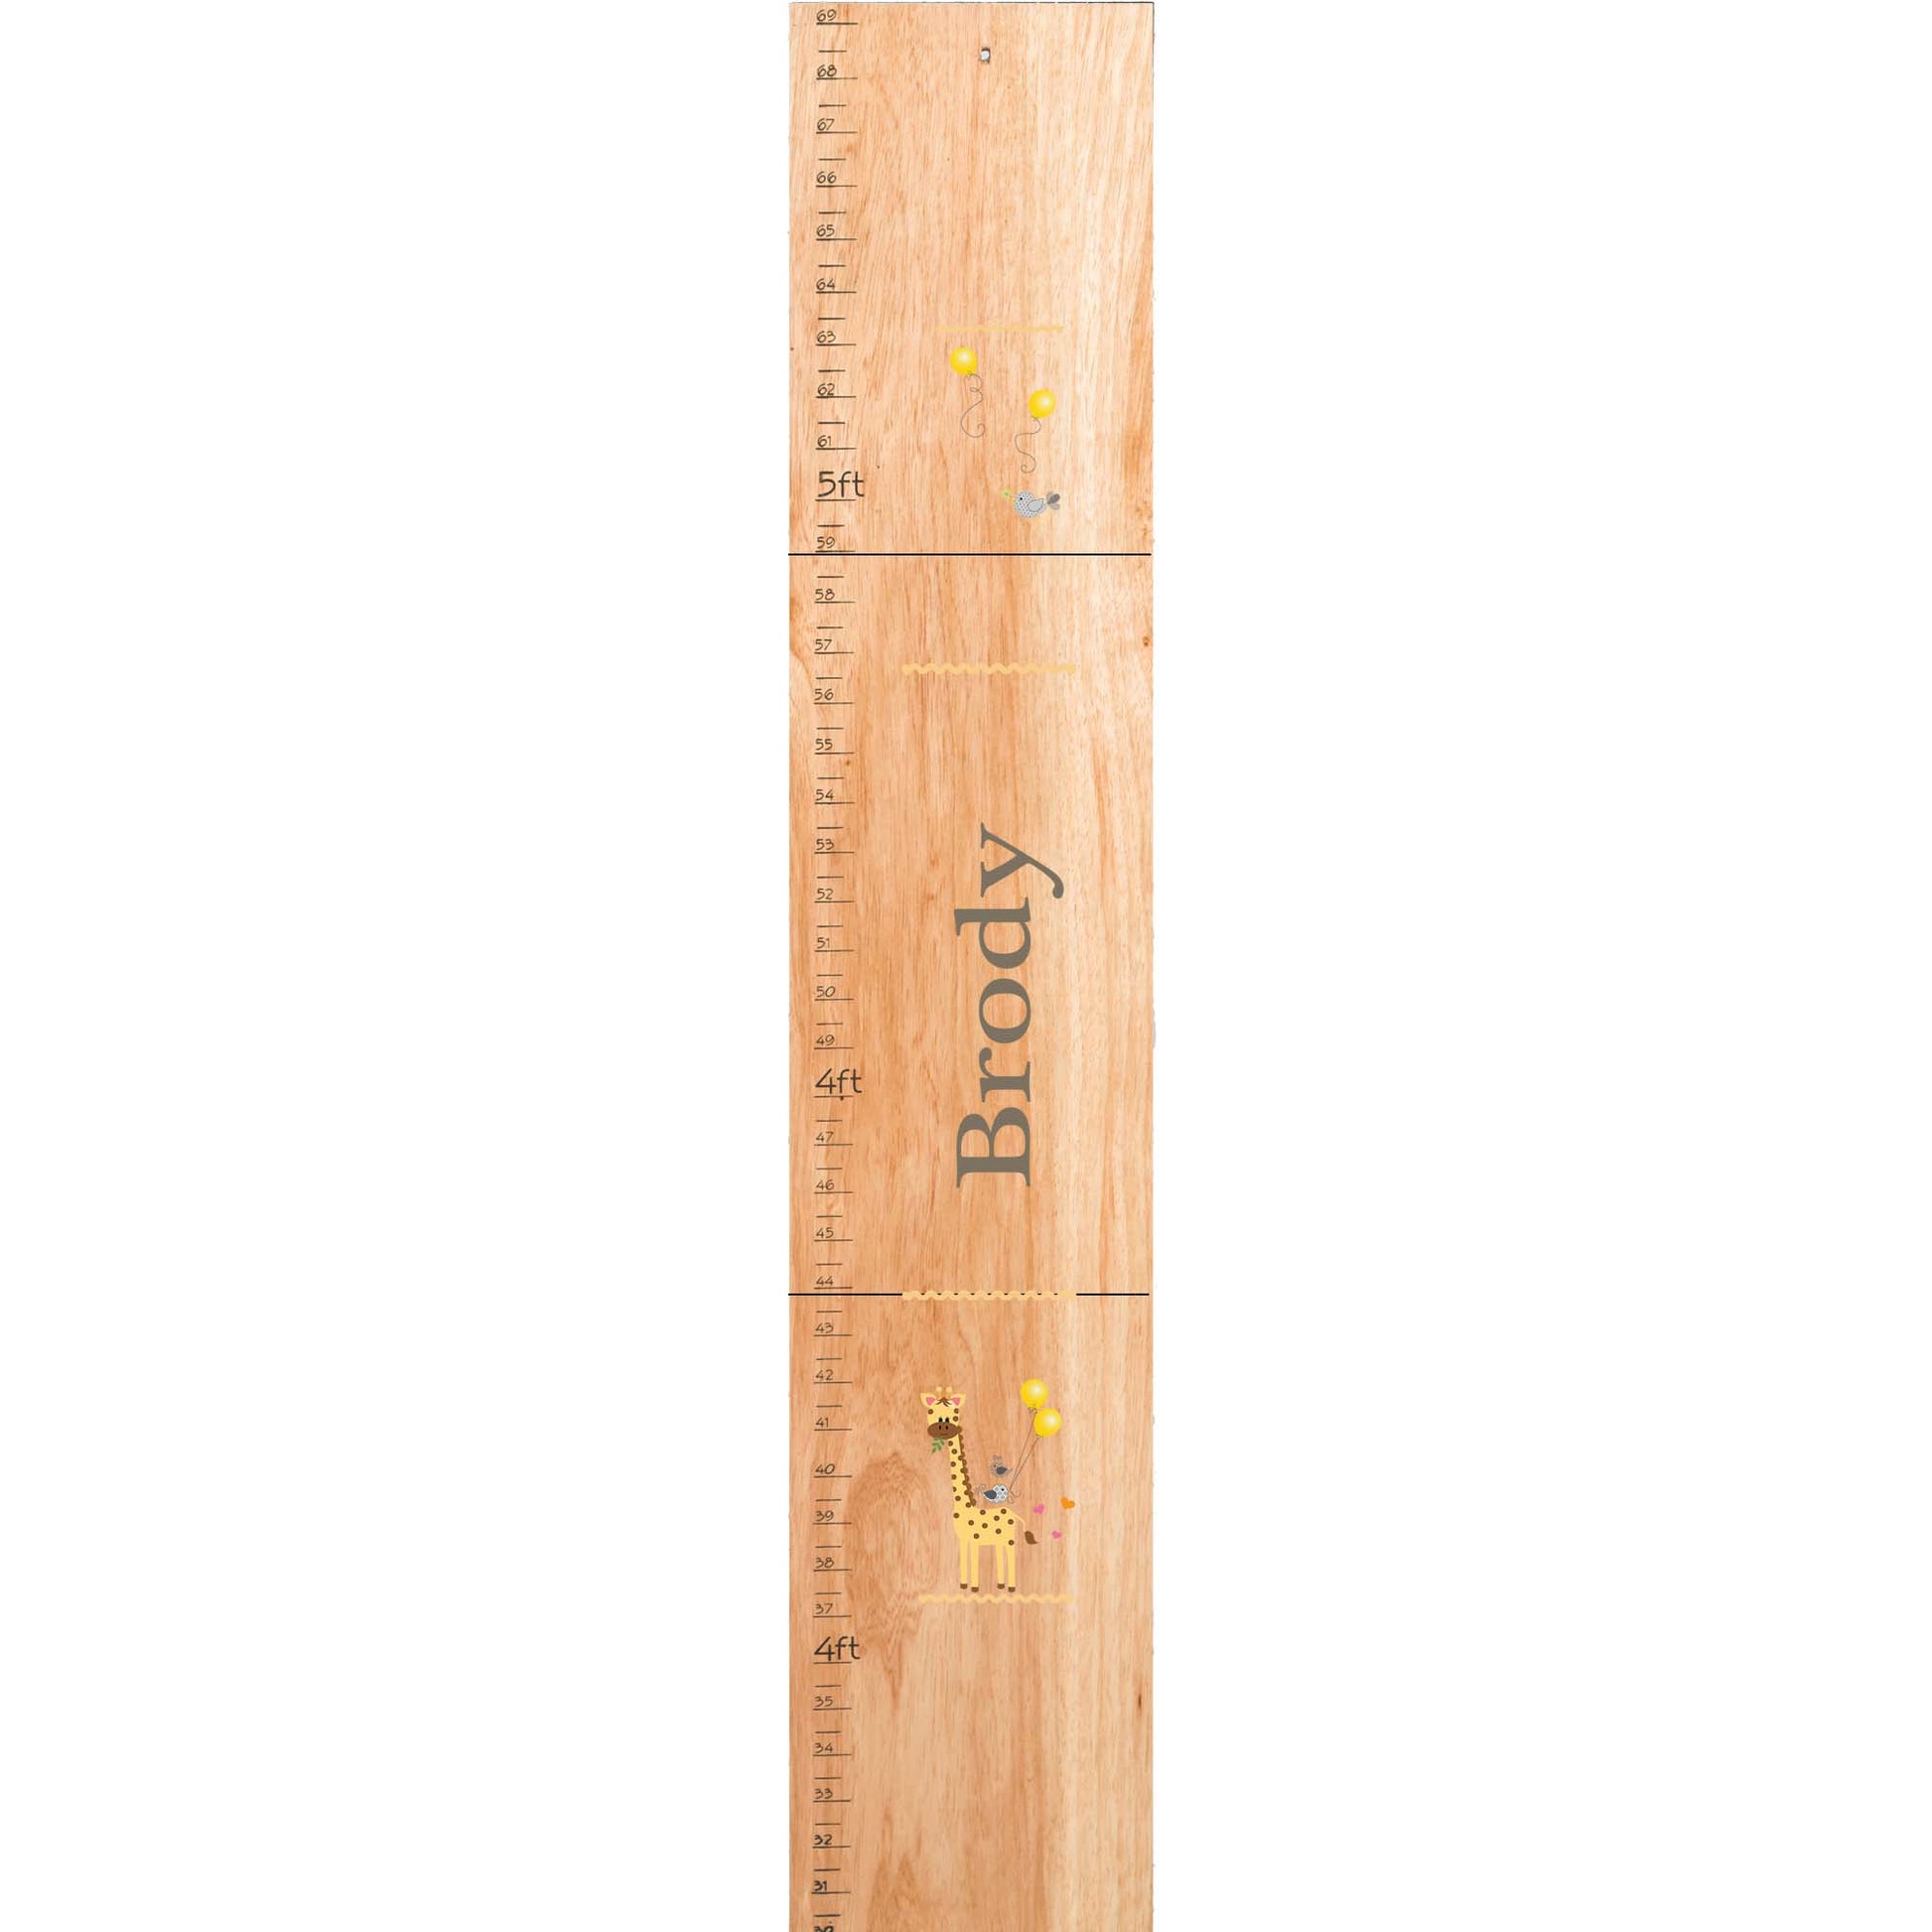 Personalized Natural Growth Chart With Tribal Arrows Design